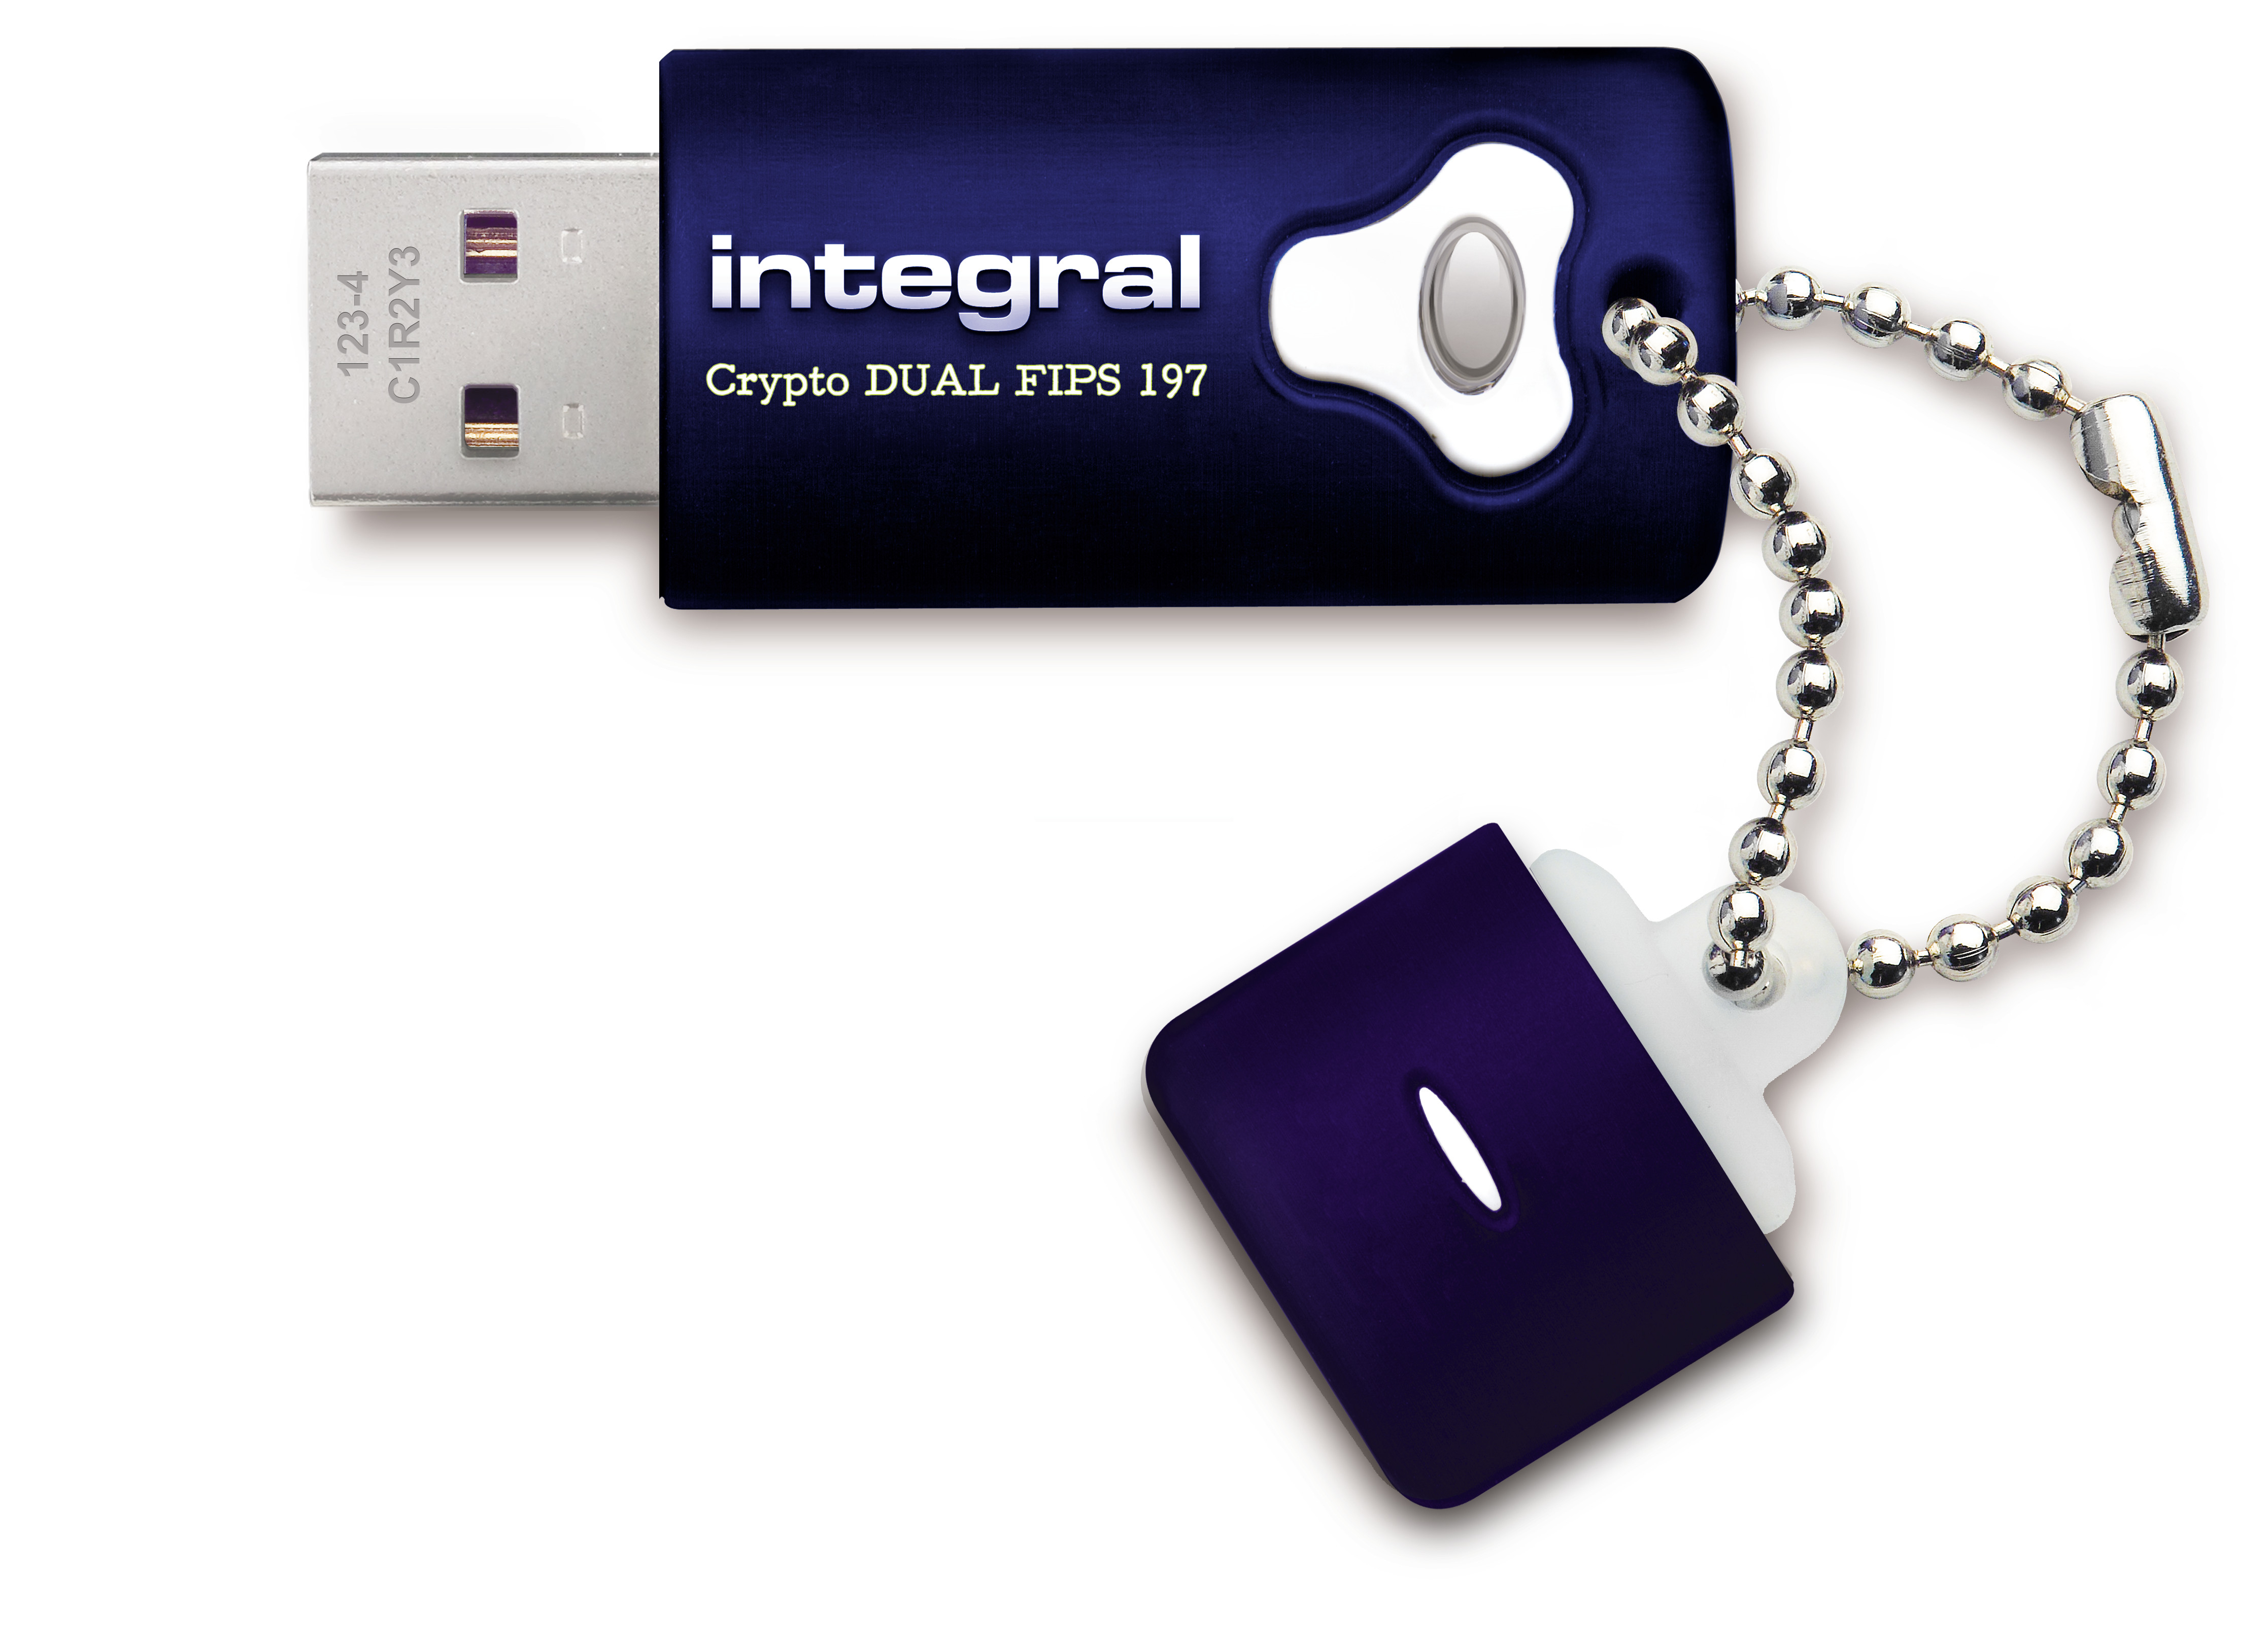 Integral 16GB Crypto Dual FIPS 197 Encrypted USB 3.0